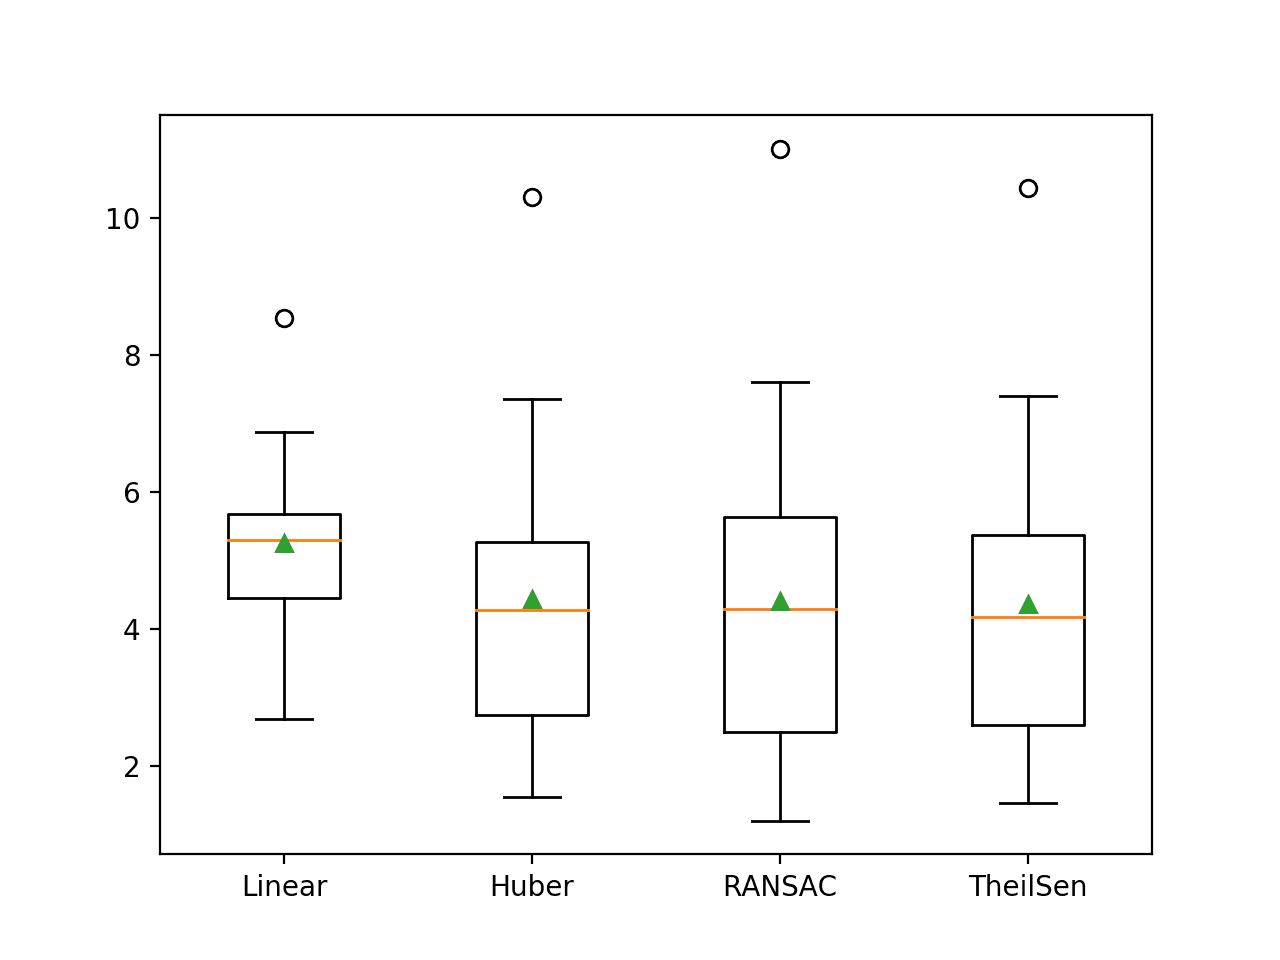 Box and Whisker Plot of MAE Scores for Robust Regression Algorithms